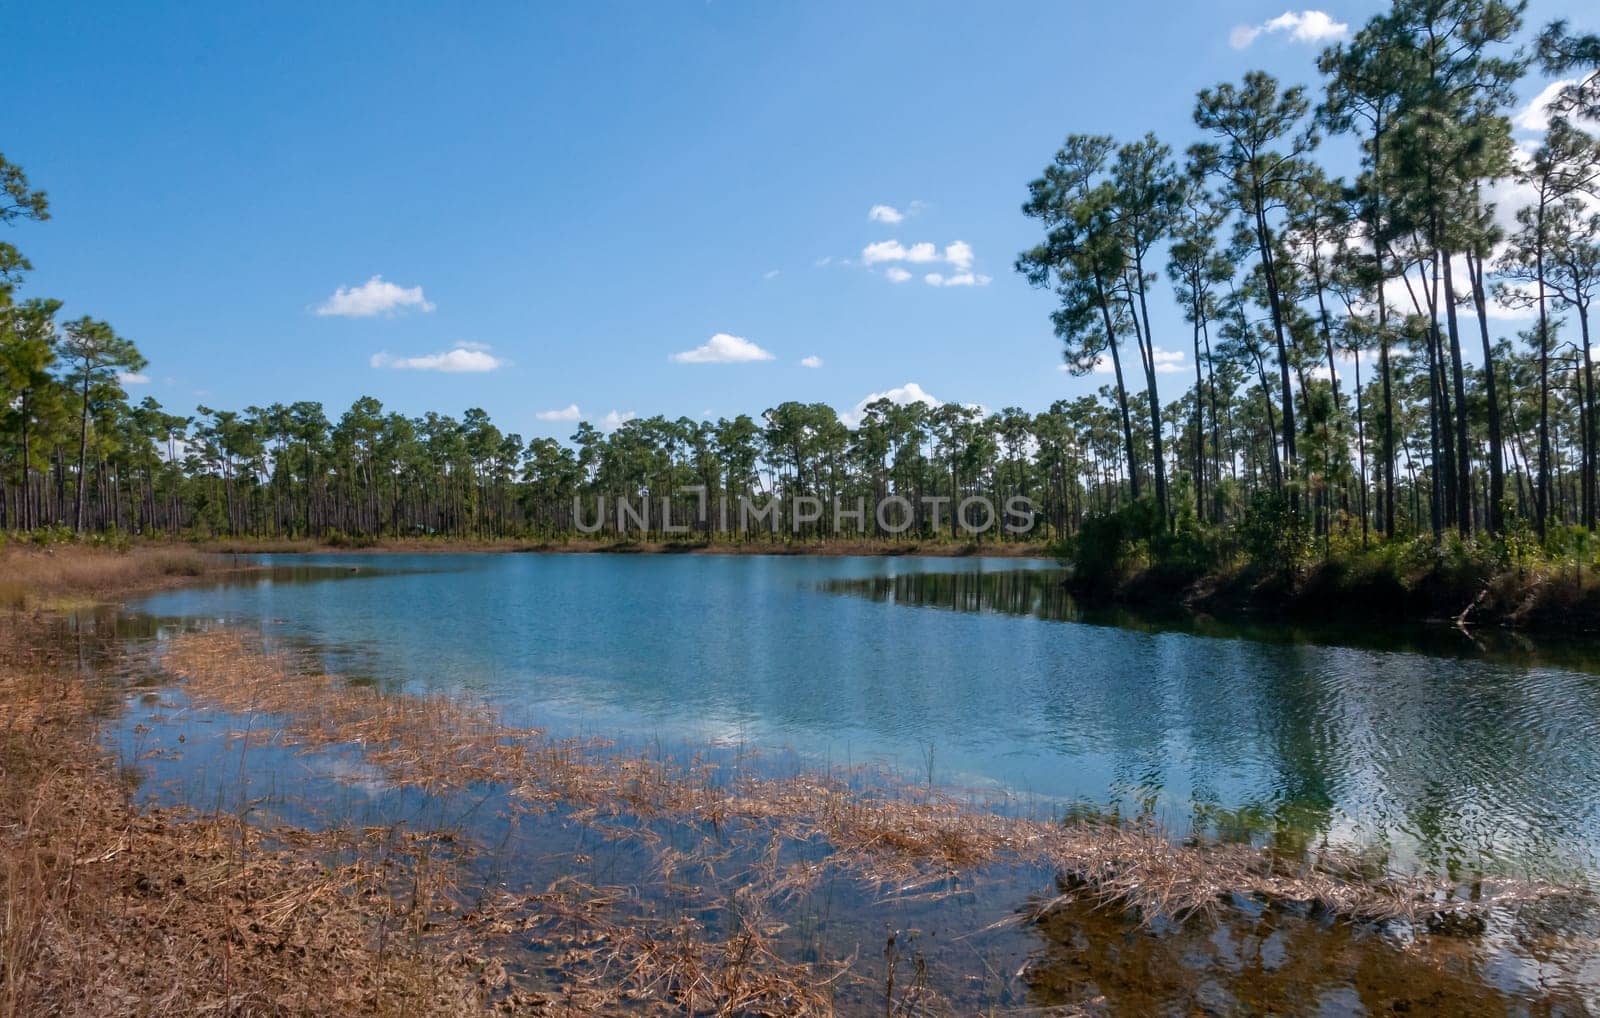 A small forested lake surrounded by woods around a swamp in Florida